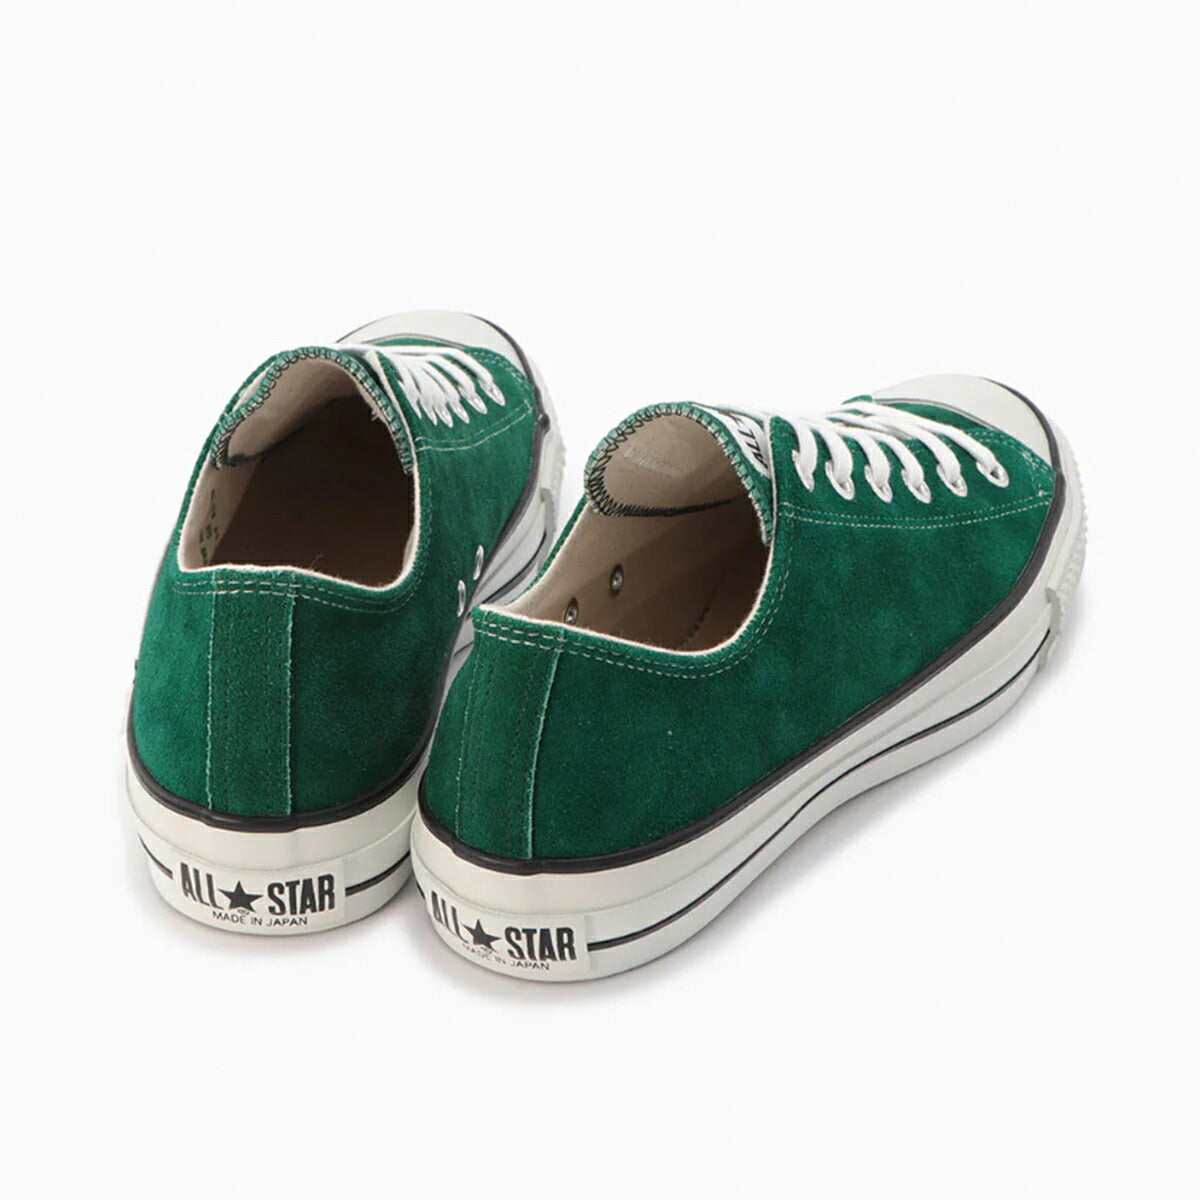 CONVERSE SUEDE ALL STAR J OX